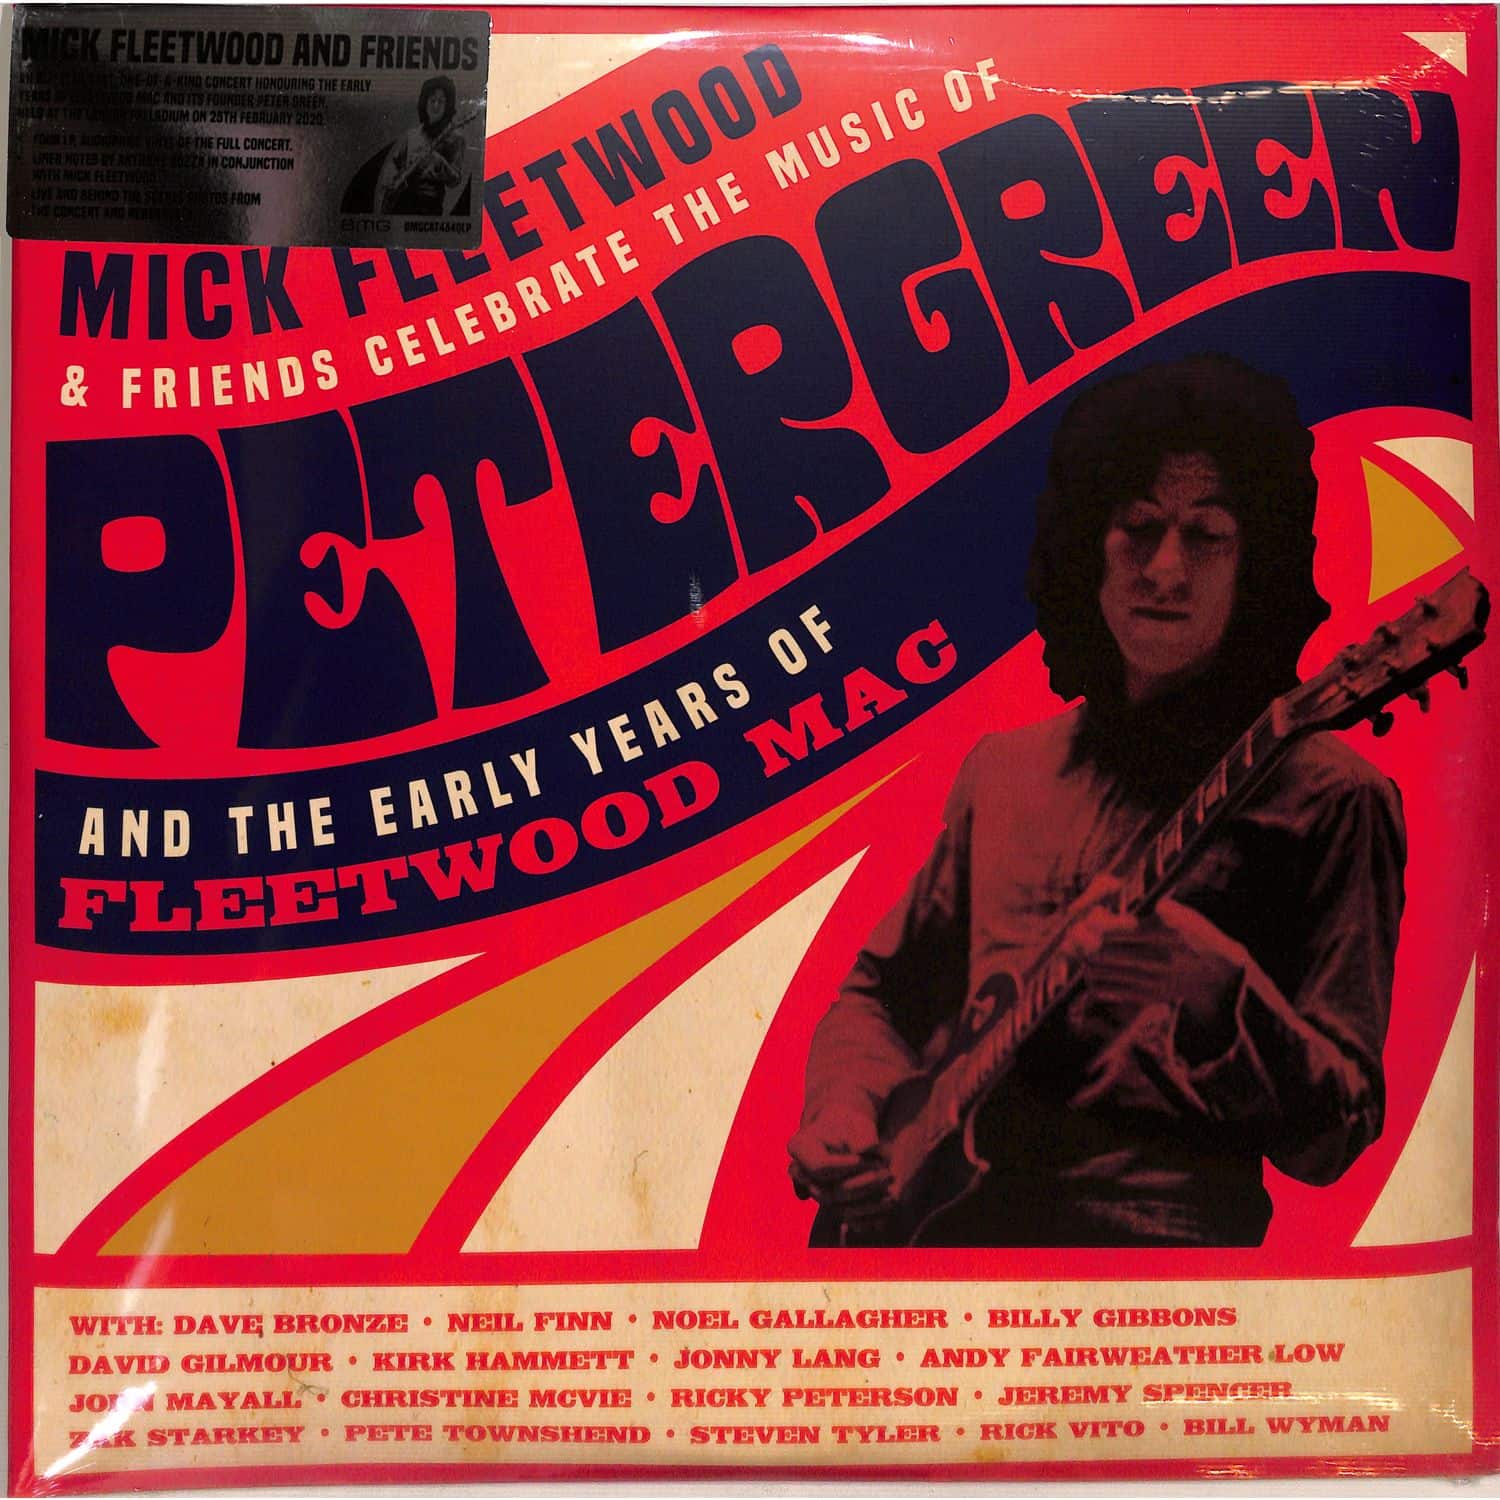  Mick and Friends Fleetwood - CELEBRATE THE MUSIC OF PETER GREEN AND THE EARLY Y 